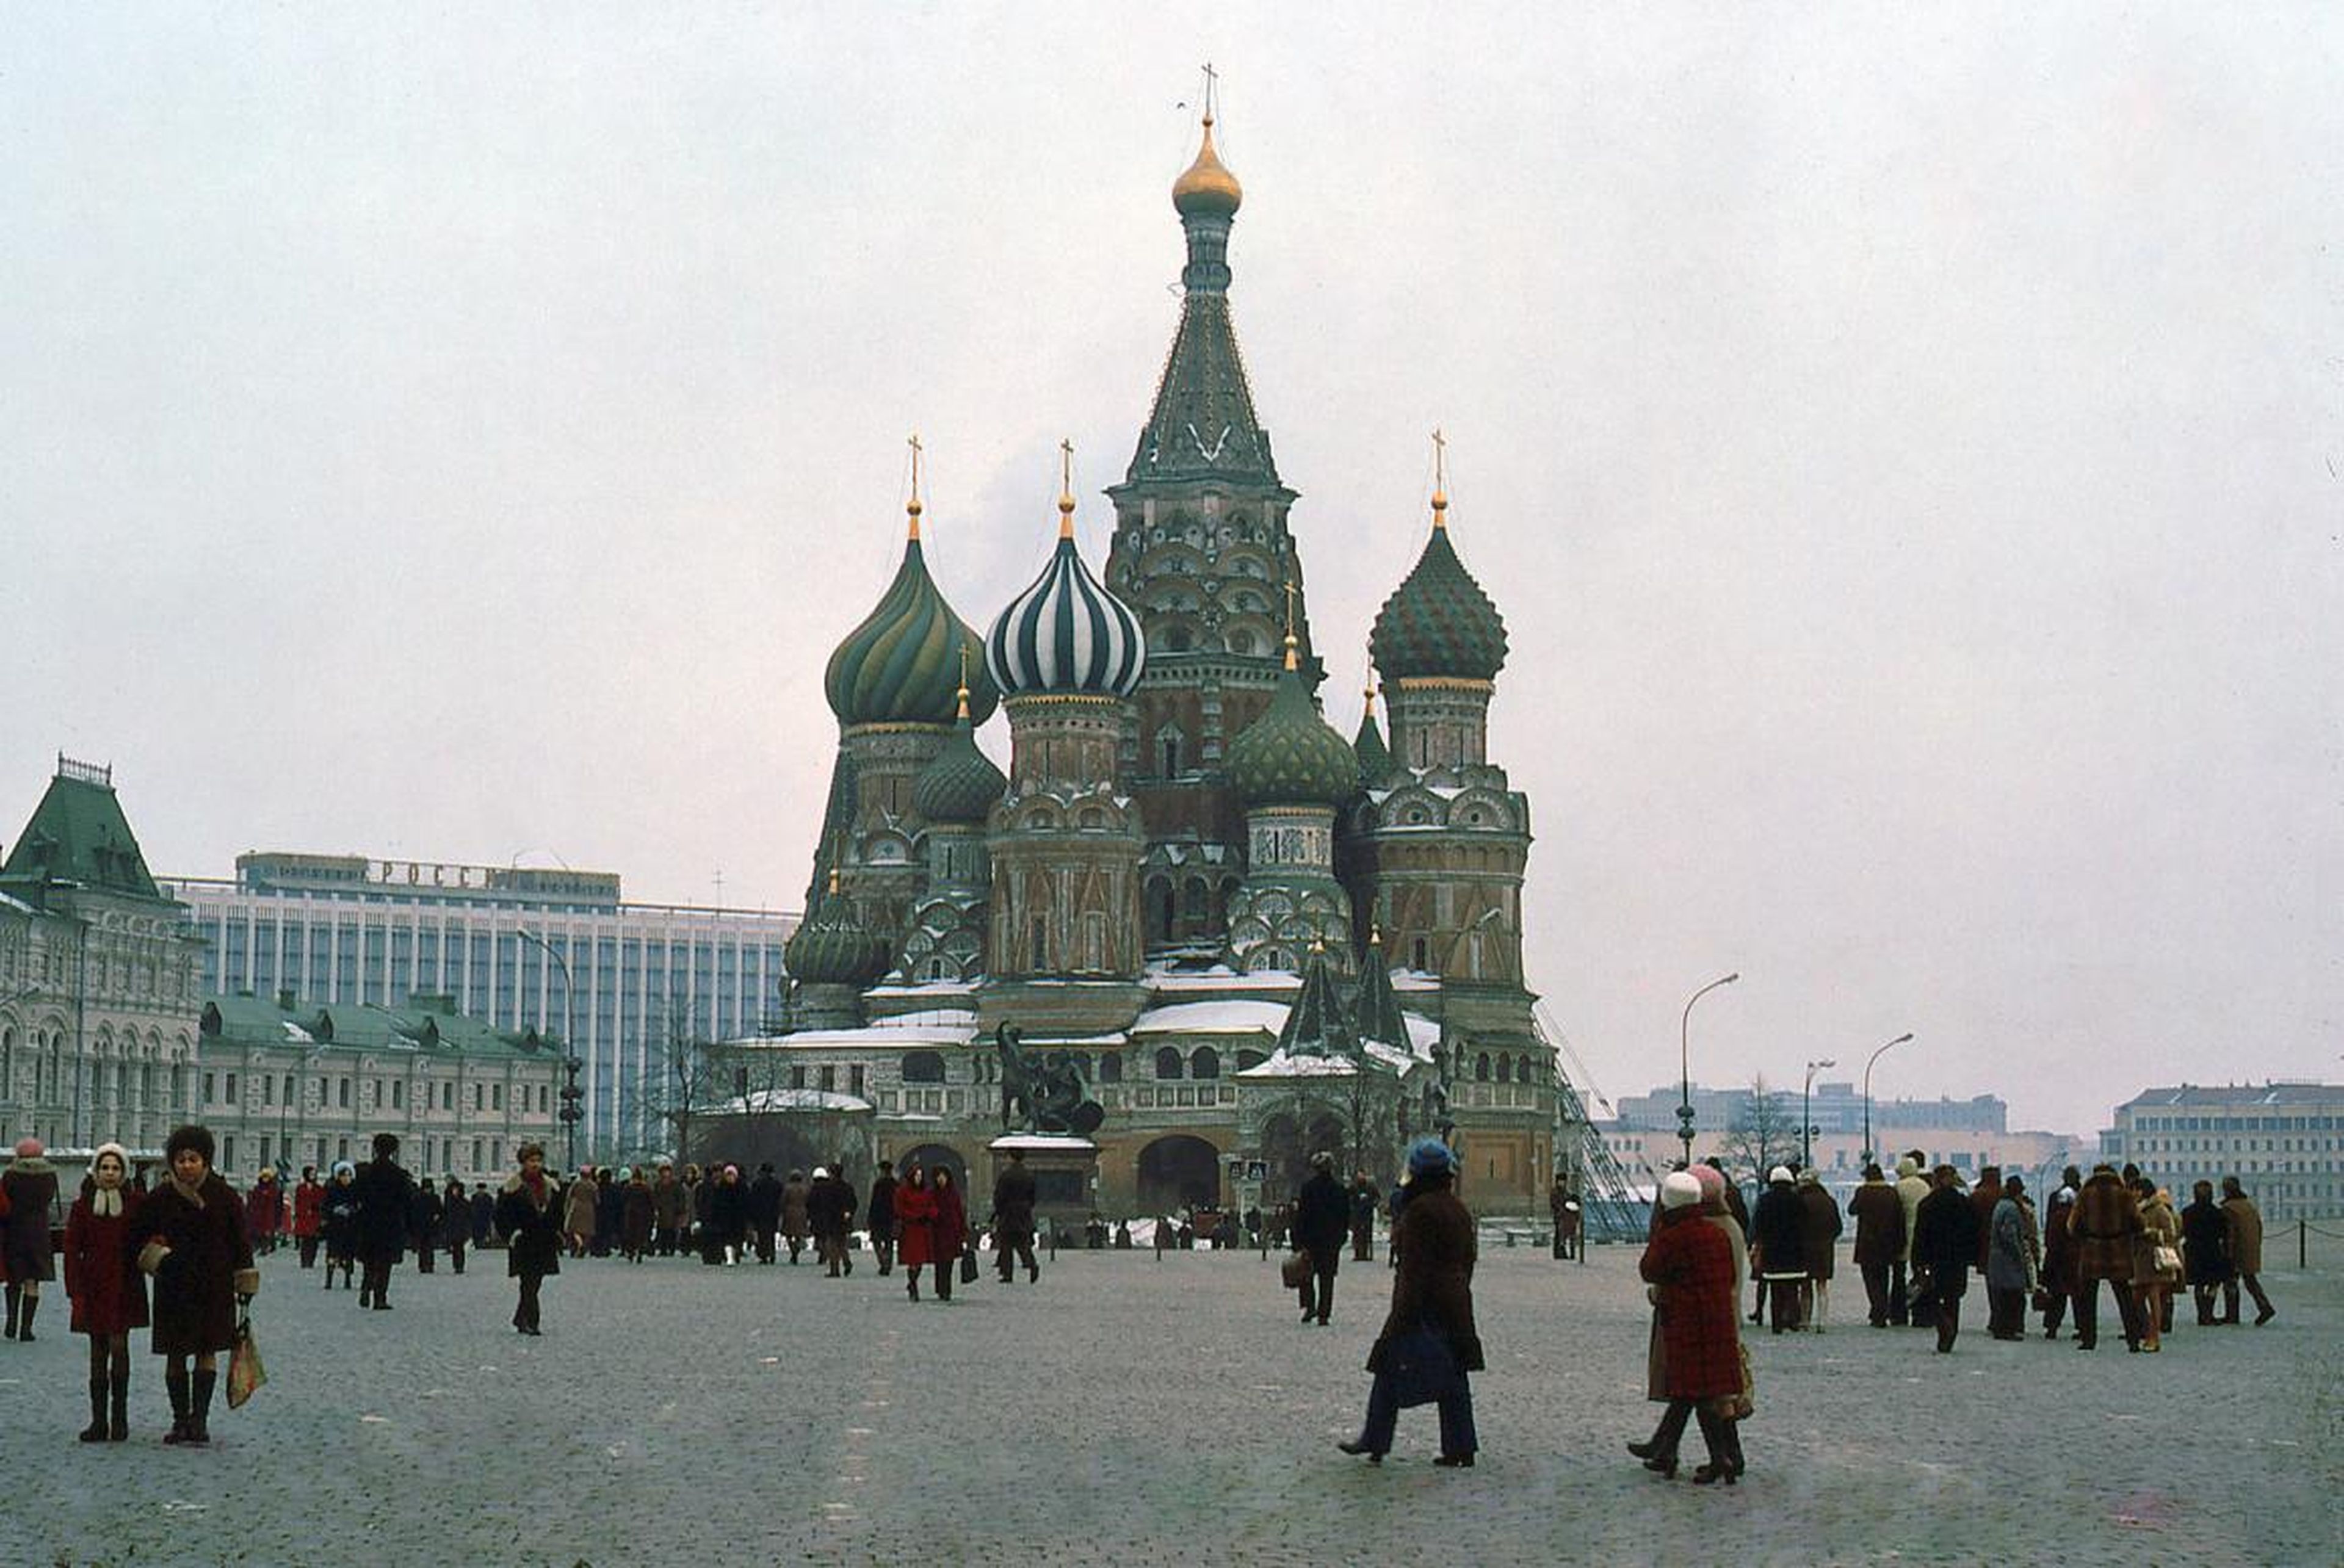 Russia's economic output plummeted 45% in the decade after the Soviet Union broke up.